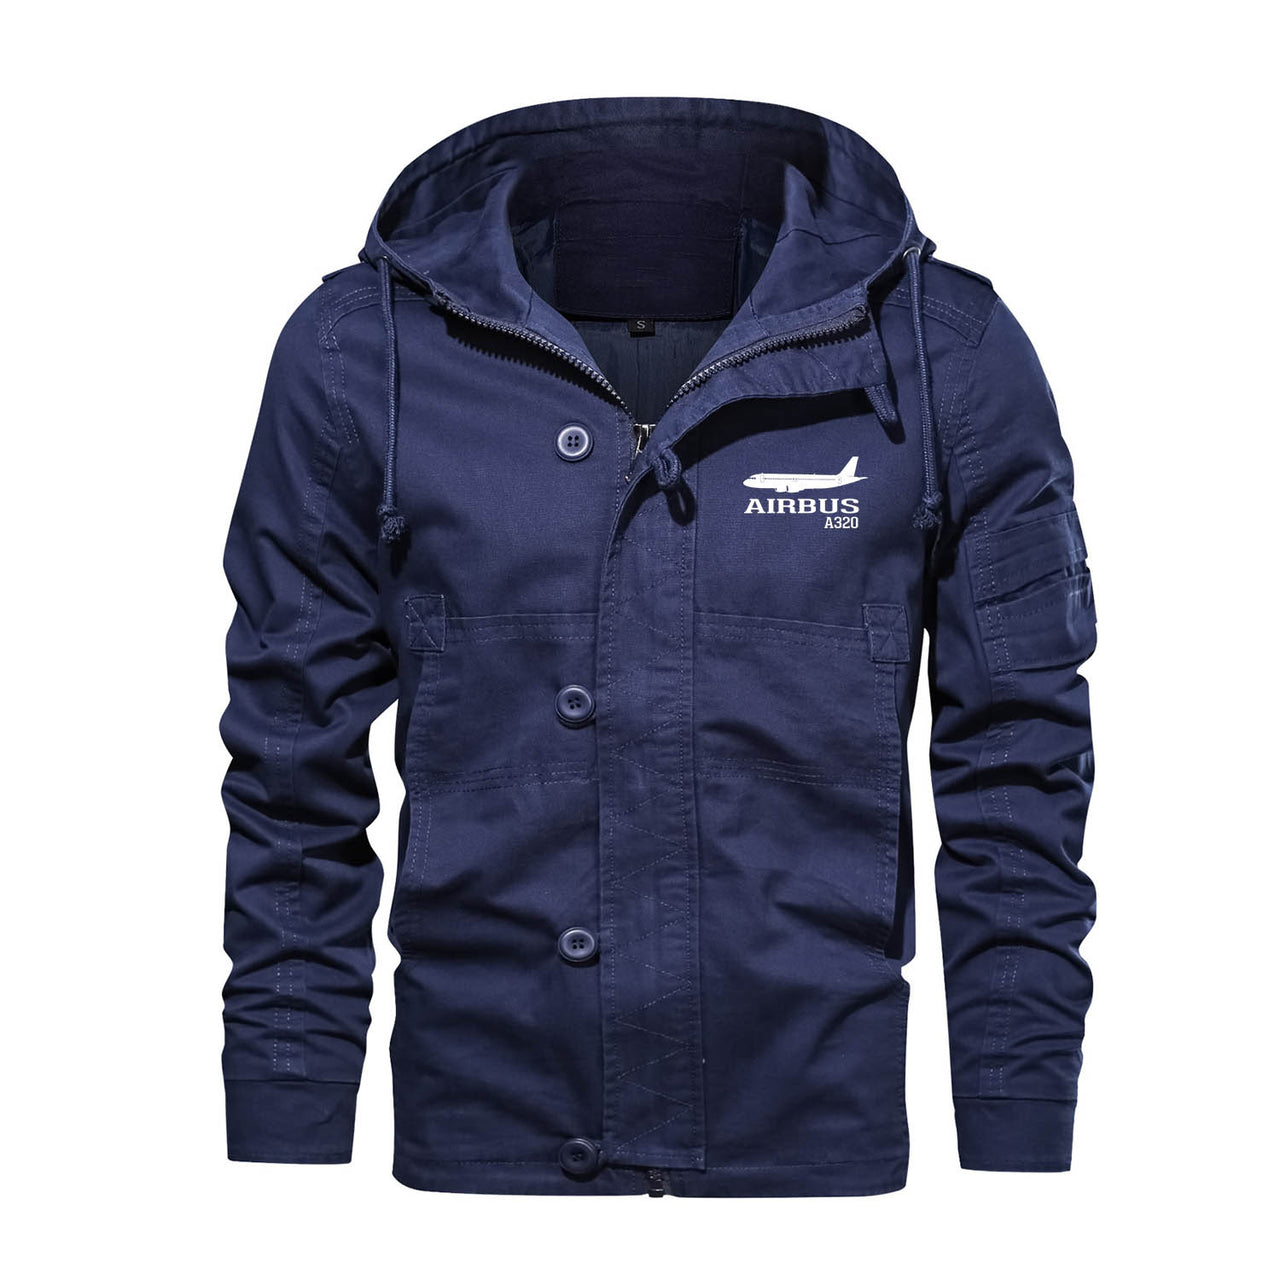 Airbus A320 Printed Designed Cotton Jackets